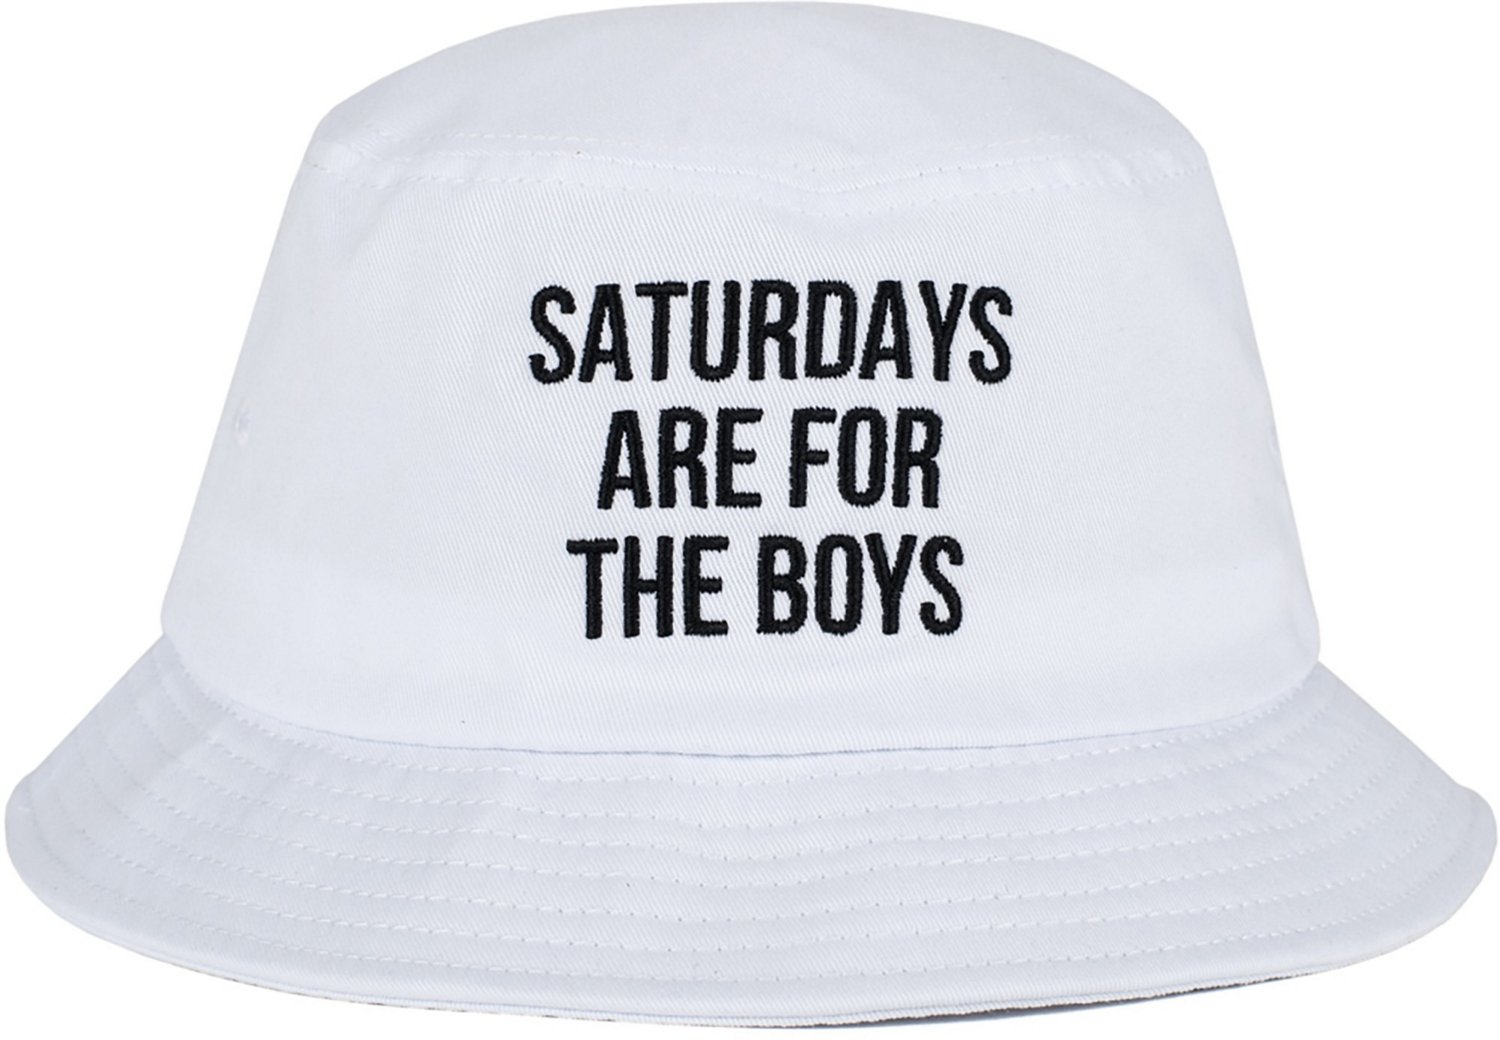 Barstool Sports Men's Saturdays Are For The Boys Bucket Hat